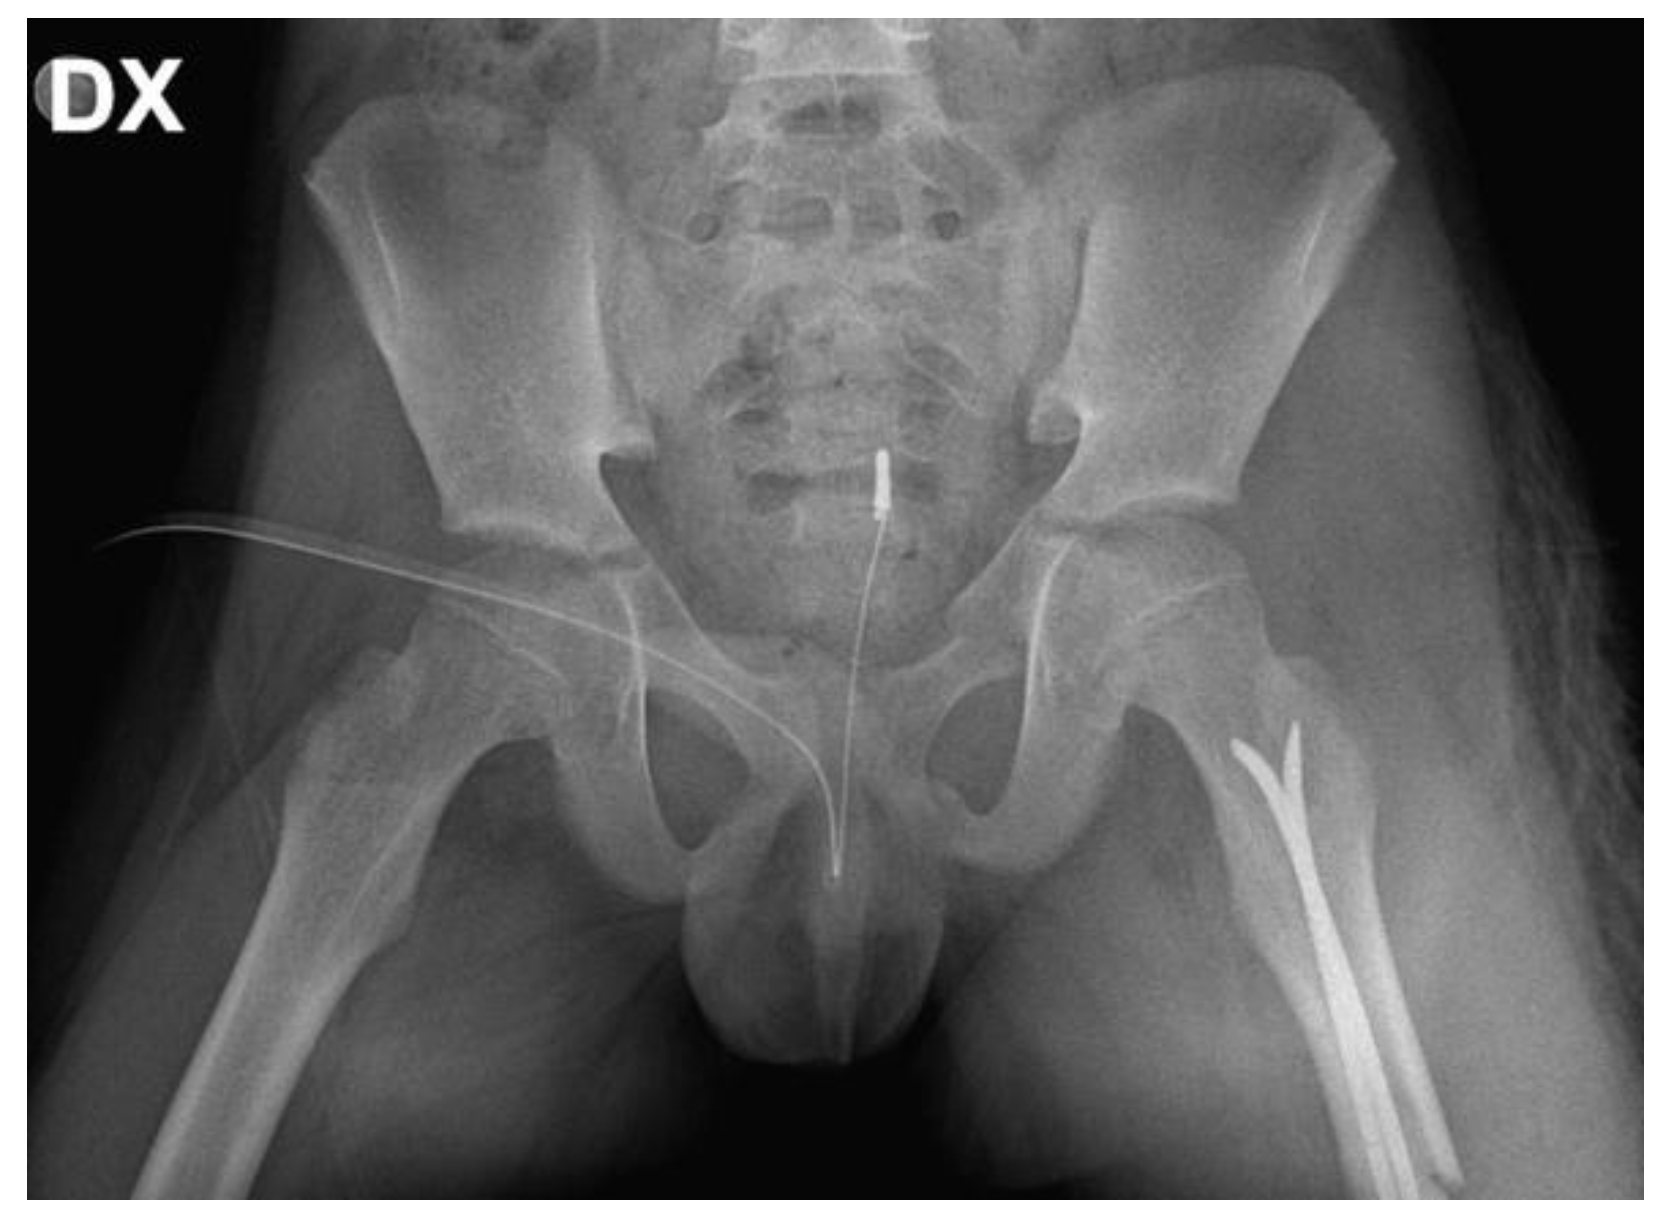 Assessing & Treating Pelvic Injuries in the Field